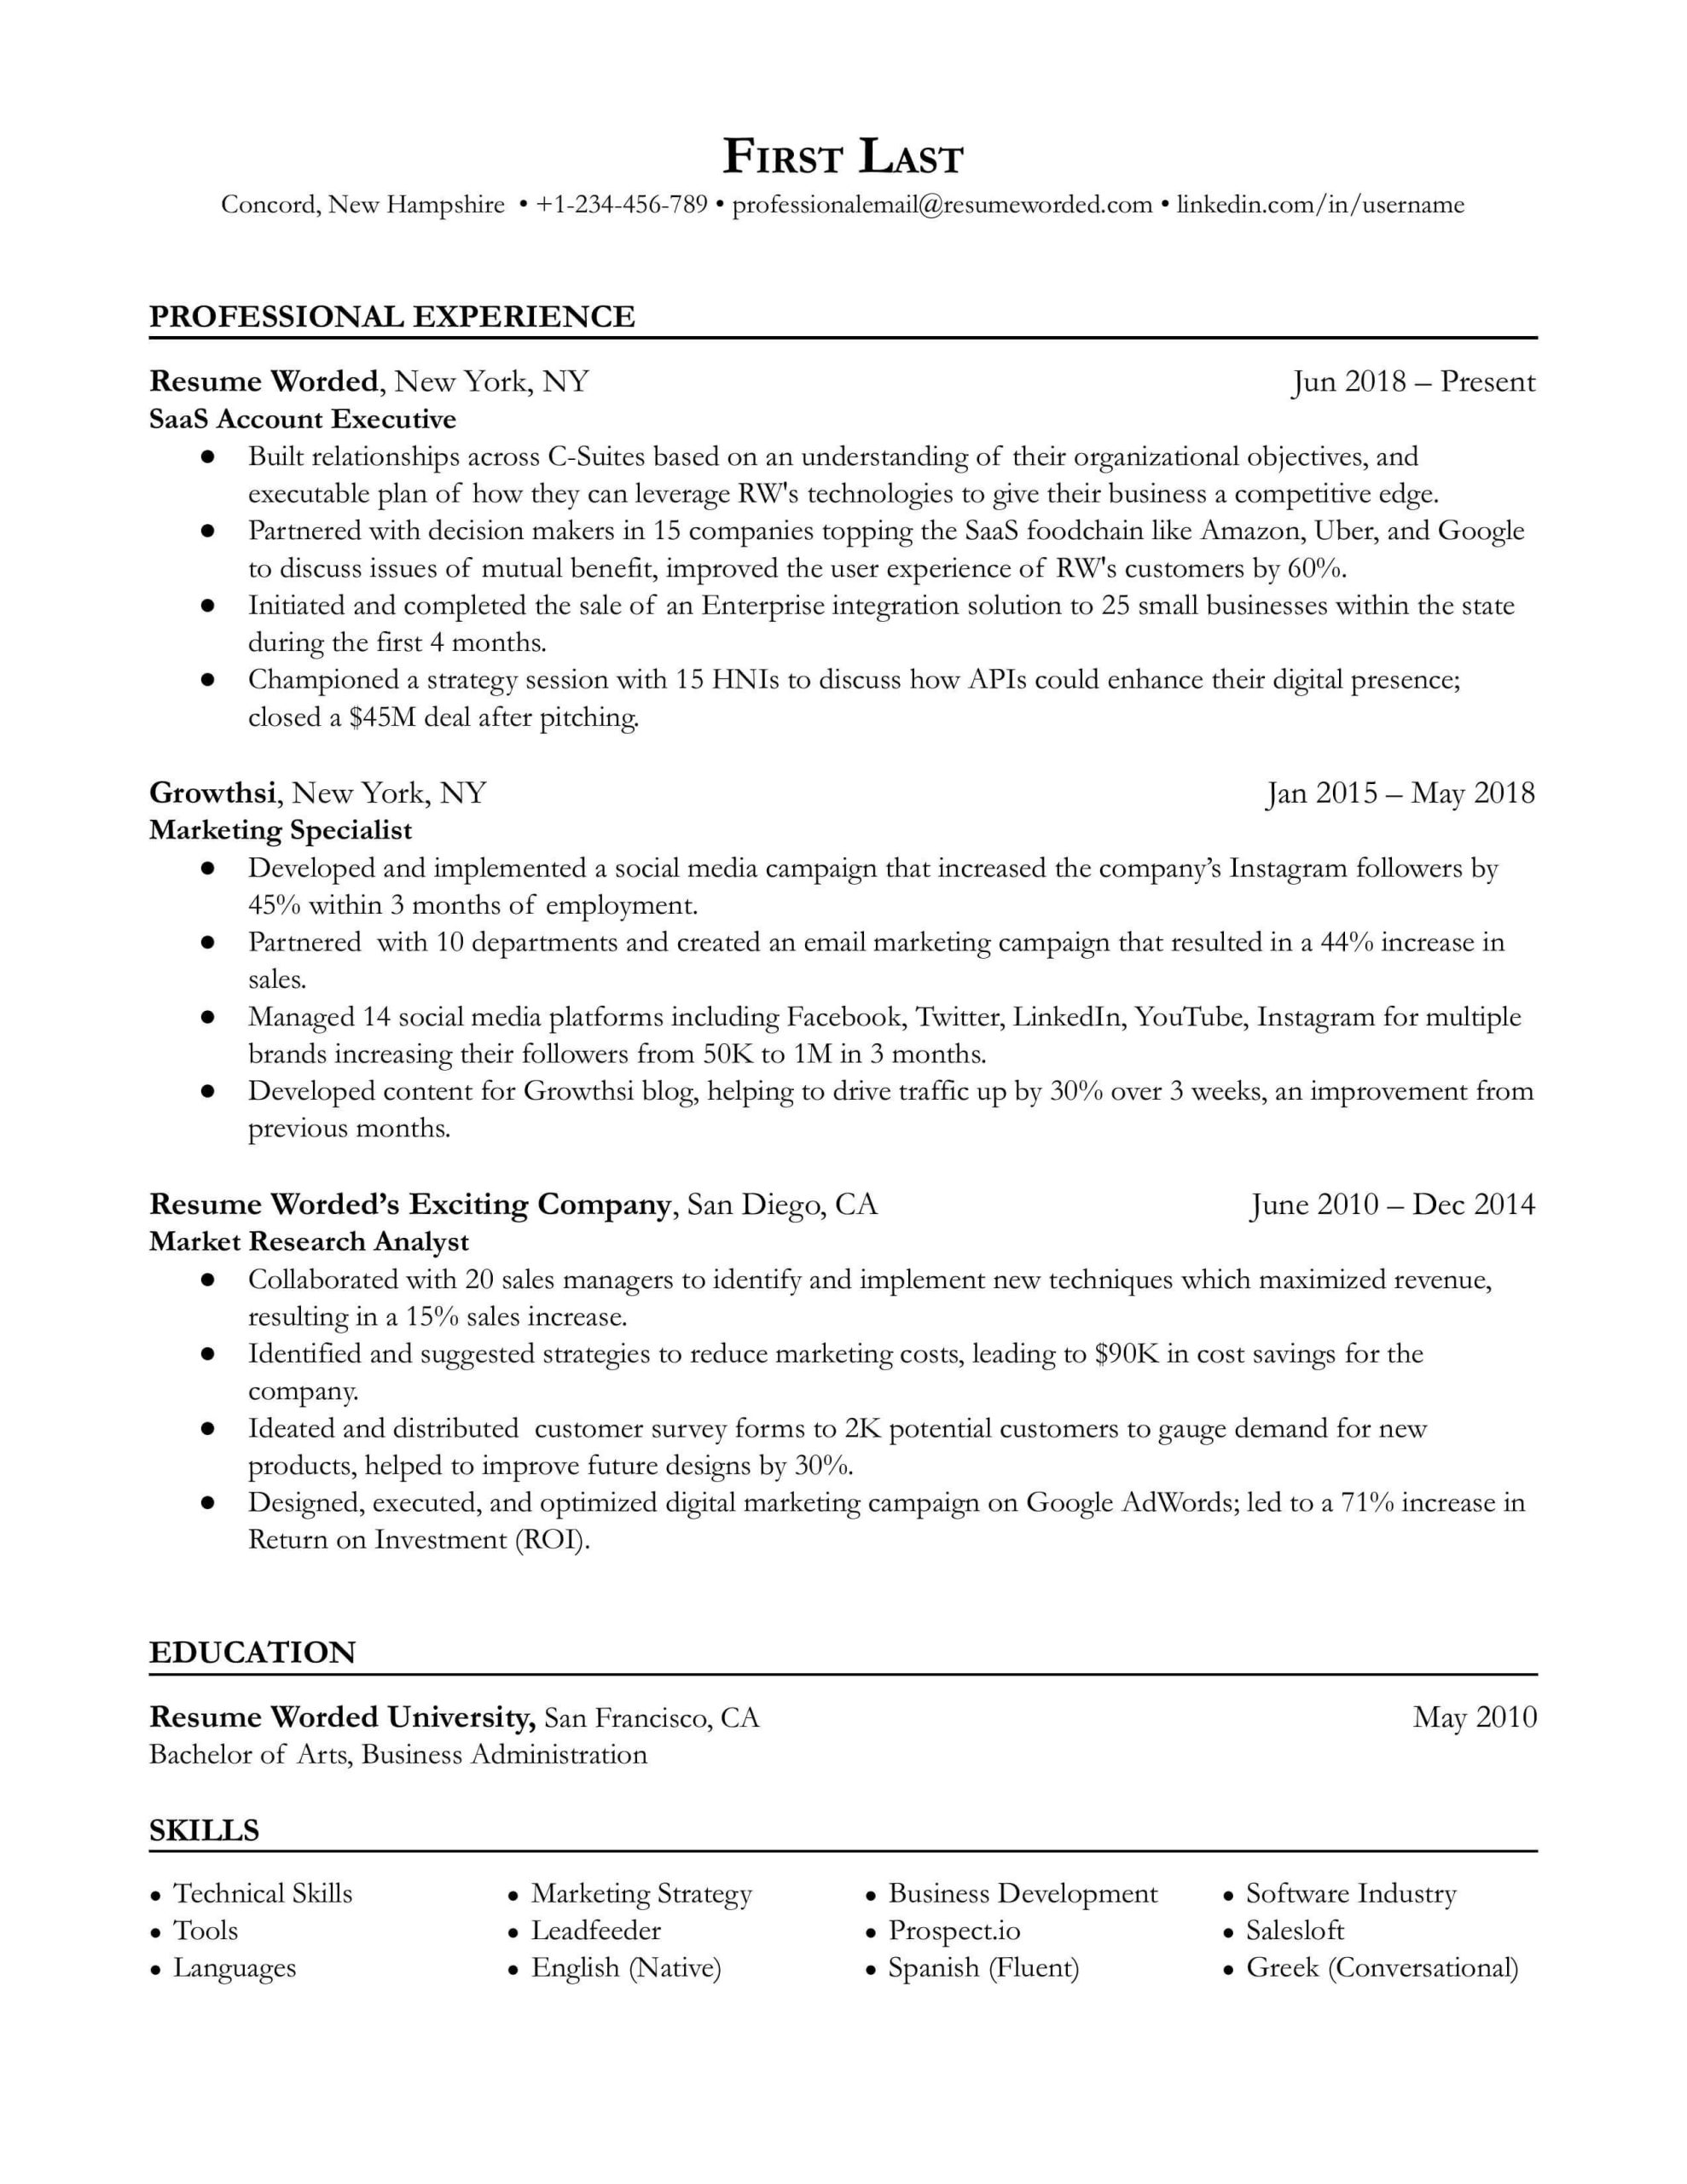 Sample New Business Account Executive Resume Saas Account Executive Resume Example for 2022 Resume Worded